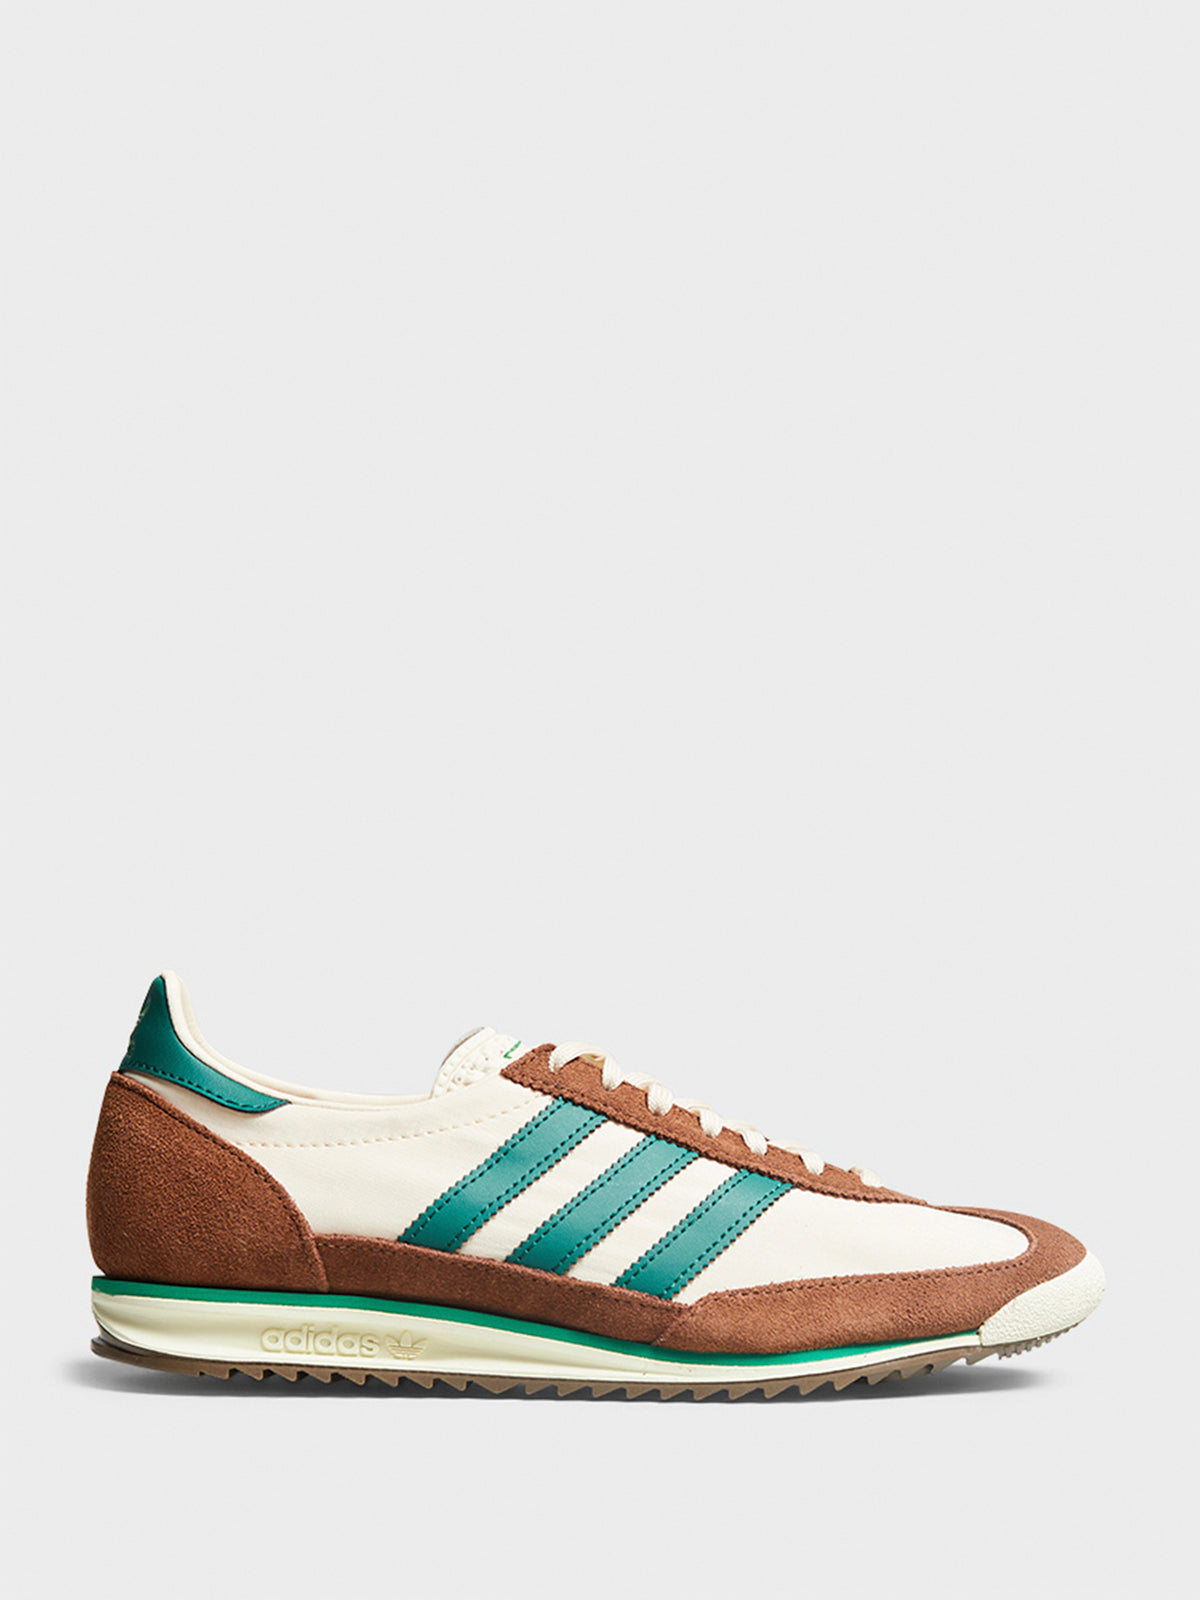 Women's SL72 OG Sneakers in White, Green and Brown